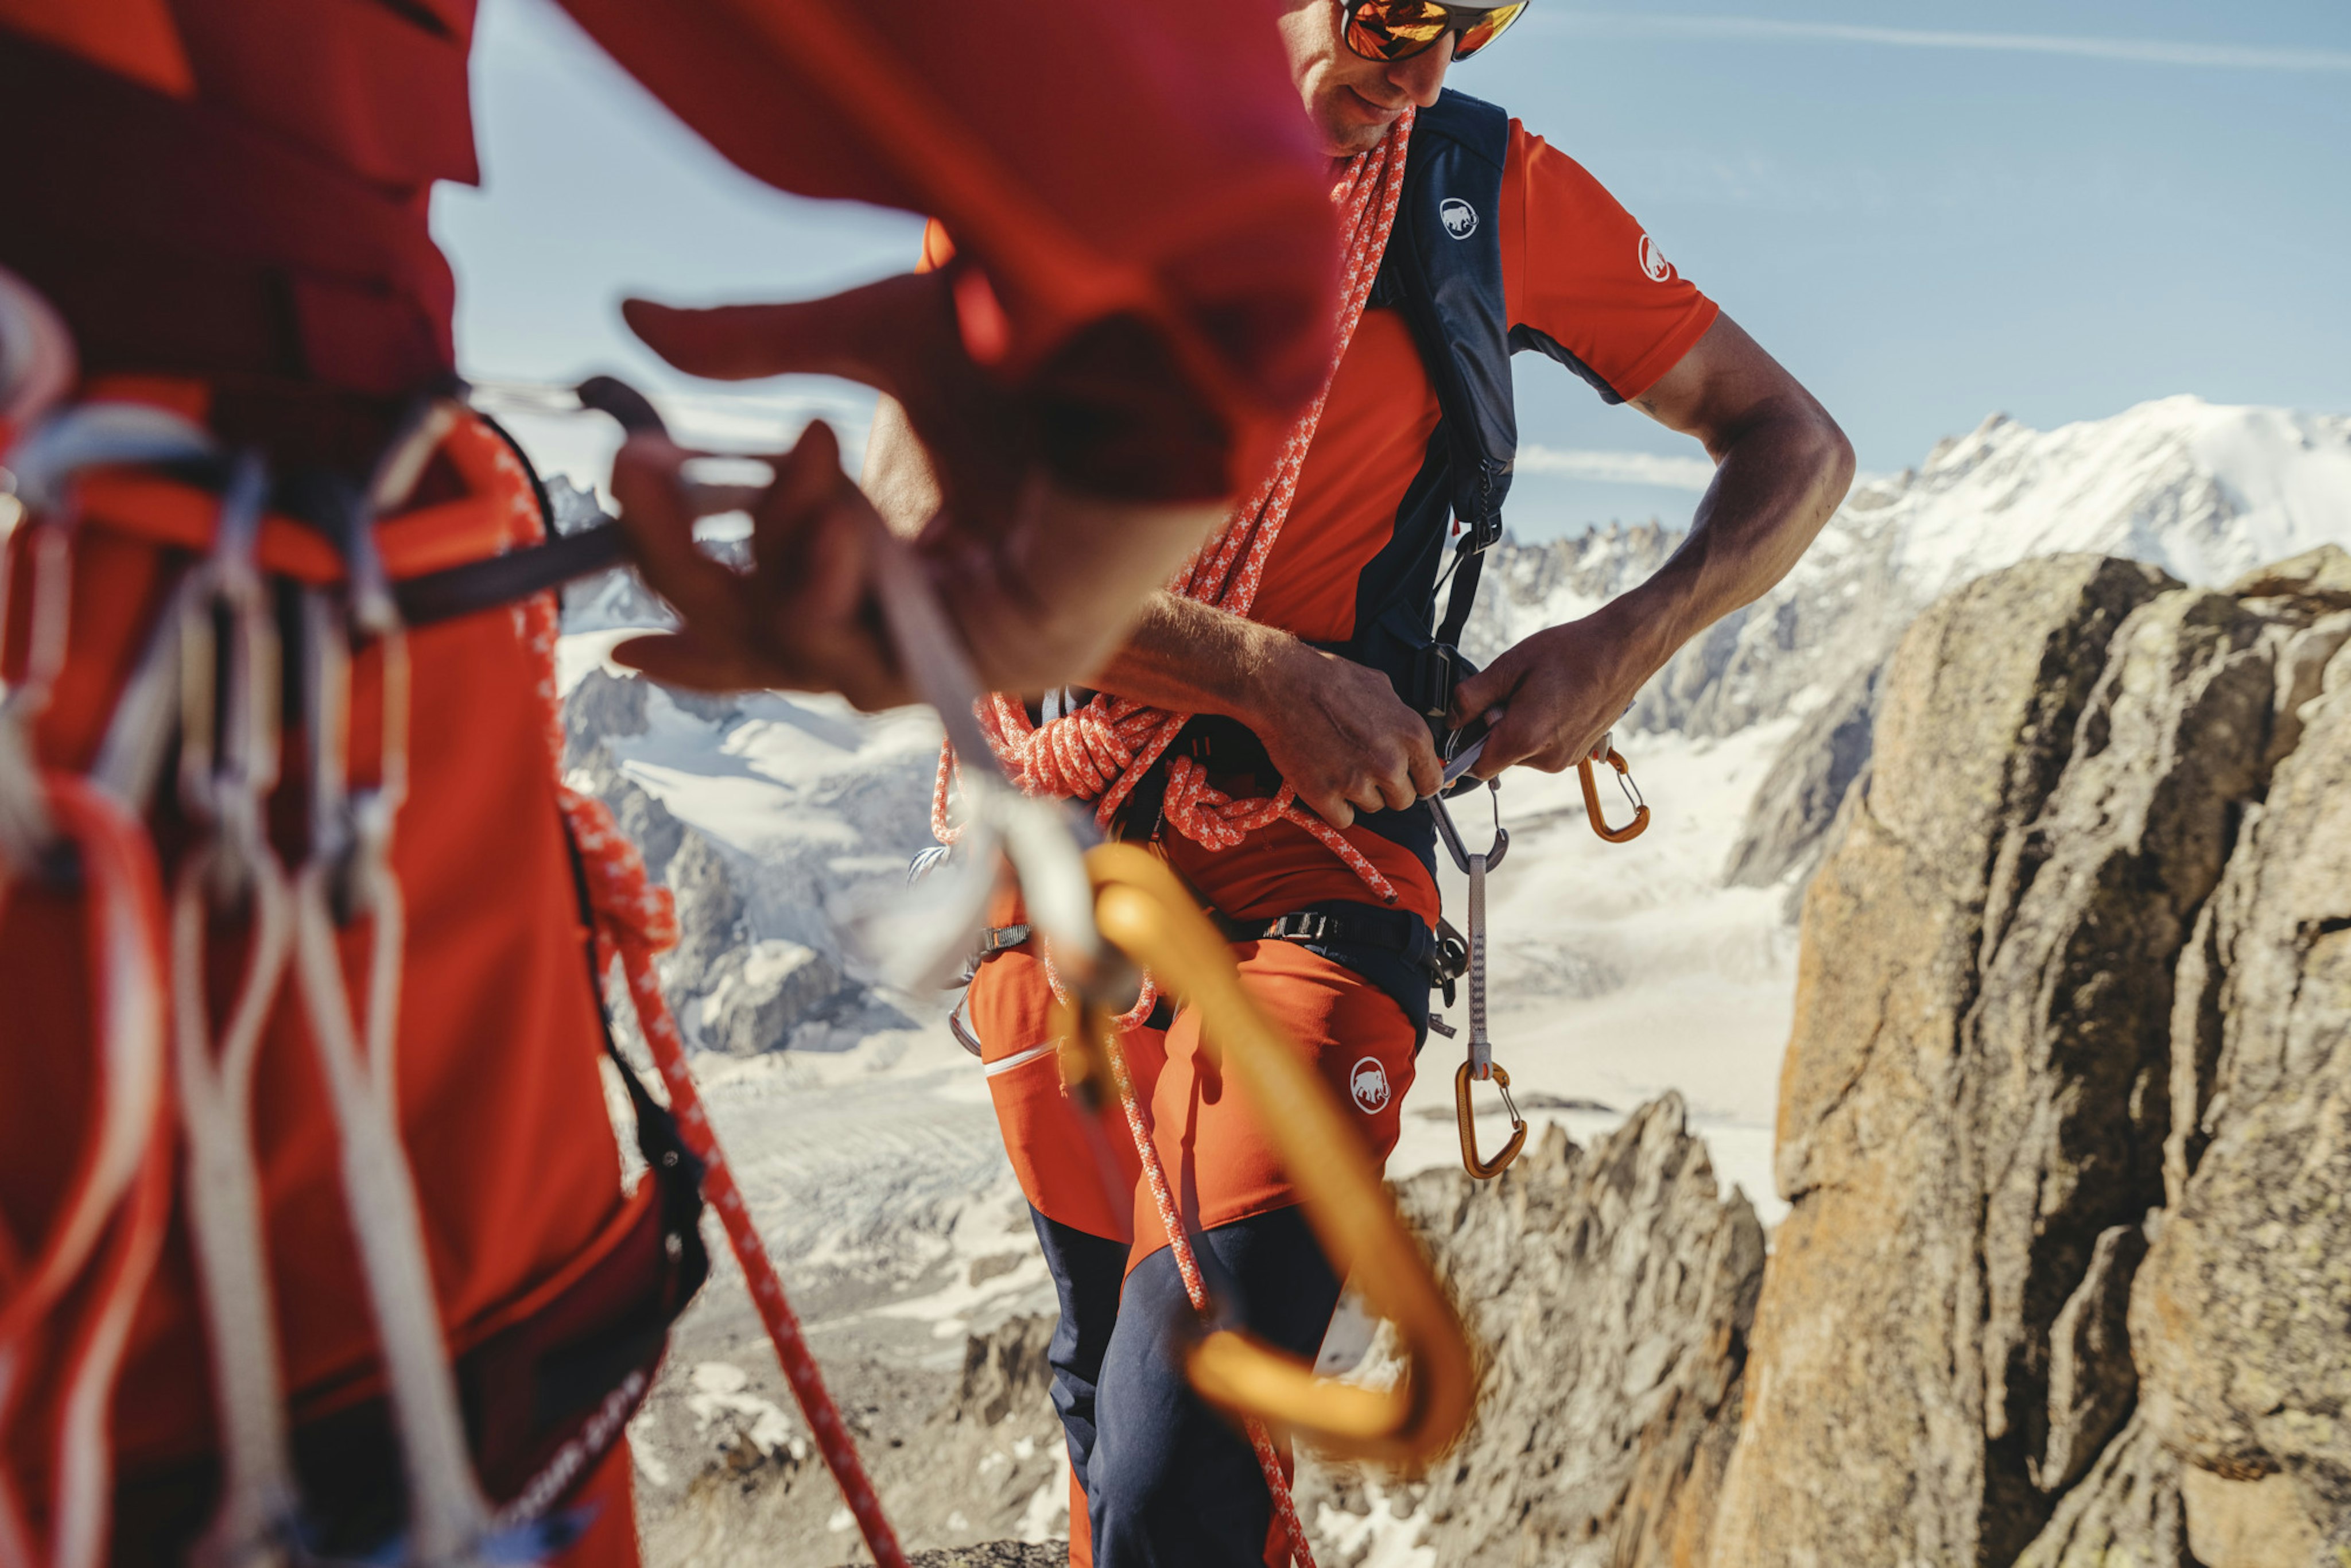 Mammut accessories for climbing and mountaineering